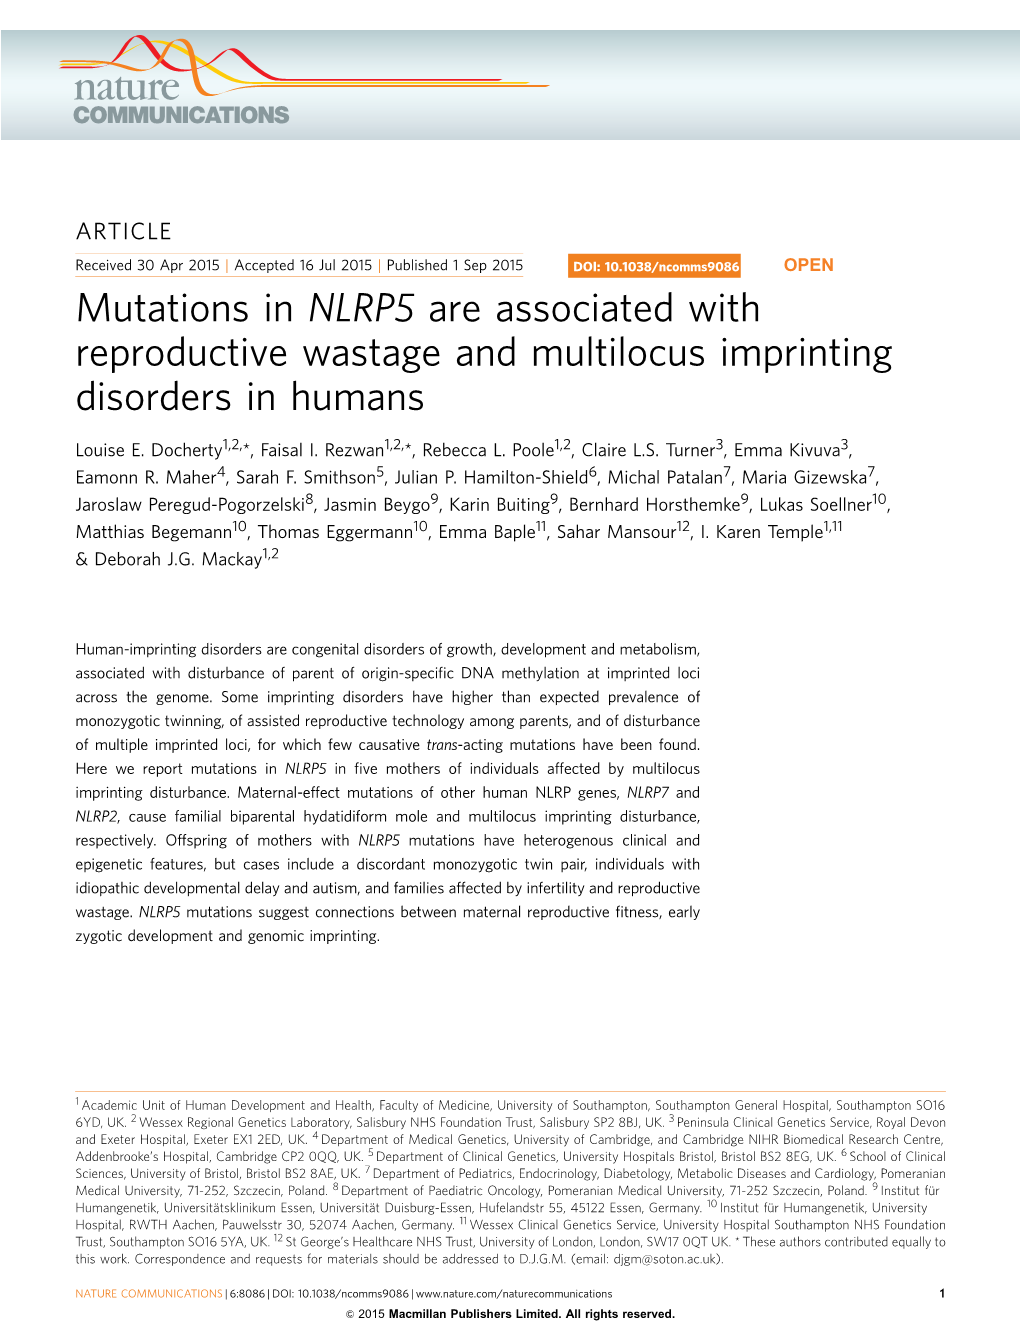 Mutations in NLRP5 Are Associated with Reproductive Wastage and Multilocus Imprinting Disorders in Humans